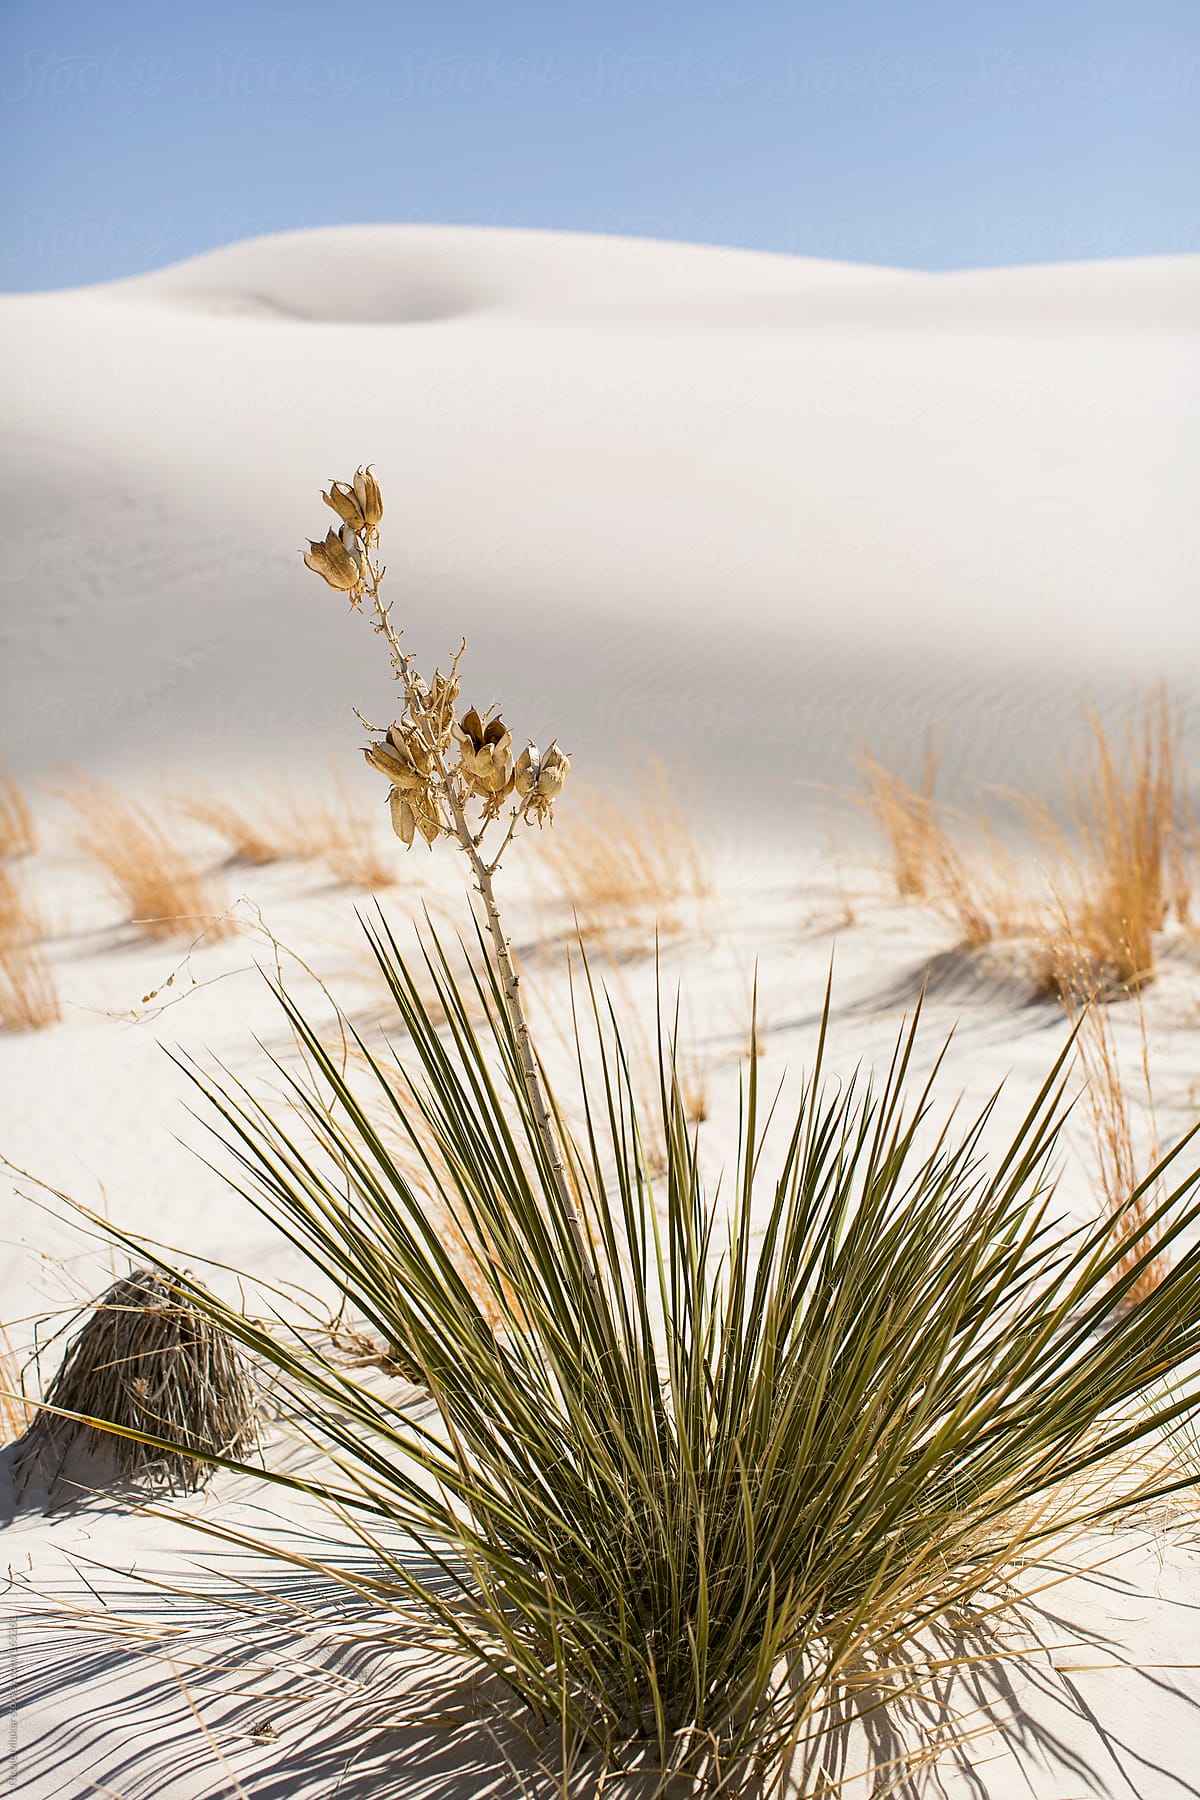 Foot prints at White Sands, New Mexico